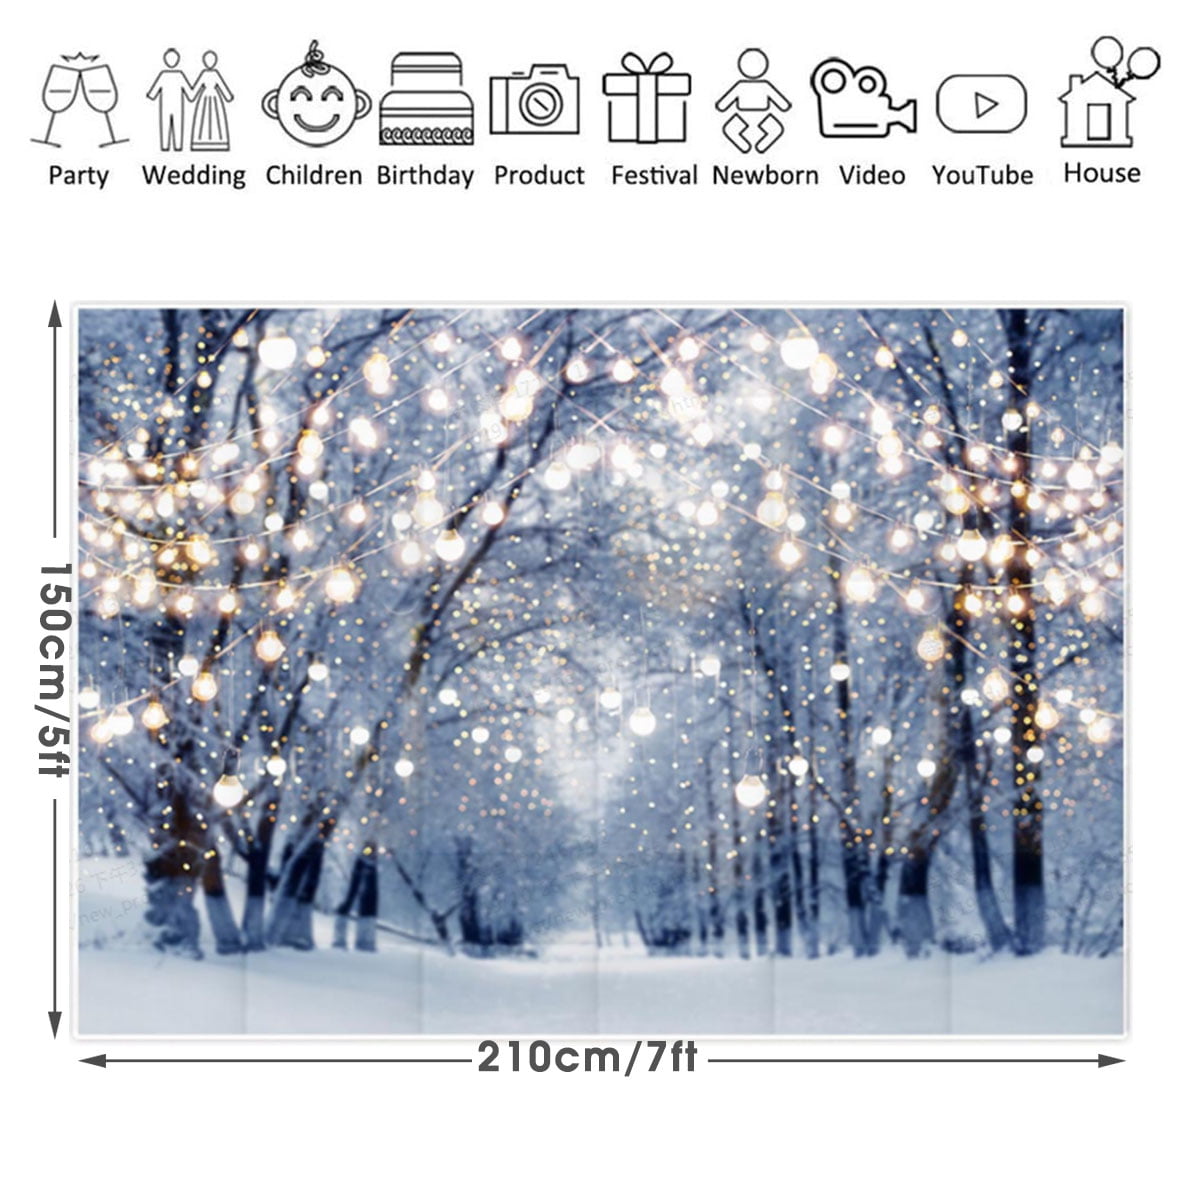 Snowflakes on Wooden Board Wedding Baby Photography Background Custom Photography Studio Photography Background